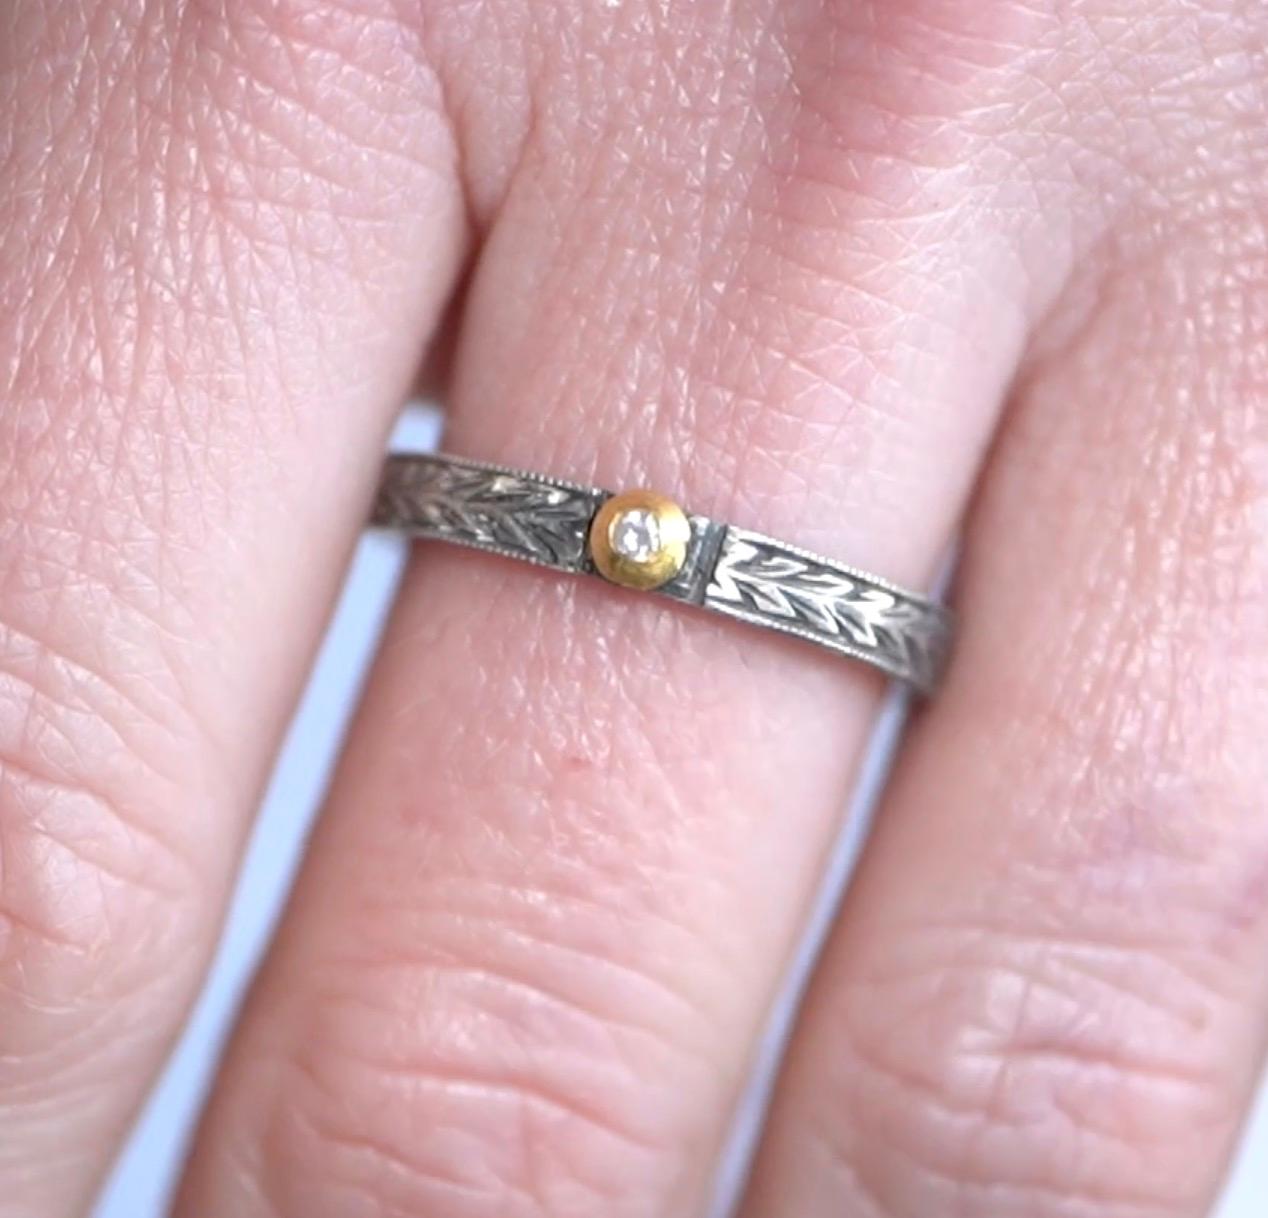 24kt Gold and Silver with Single Diamond Engraved Stacker Ring by Prehistoric Works of Istanbul, Turkey. Diamond - 0.02cts. This makes for a great stacking ring with other bands.